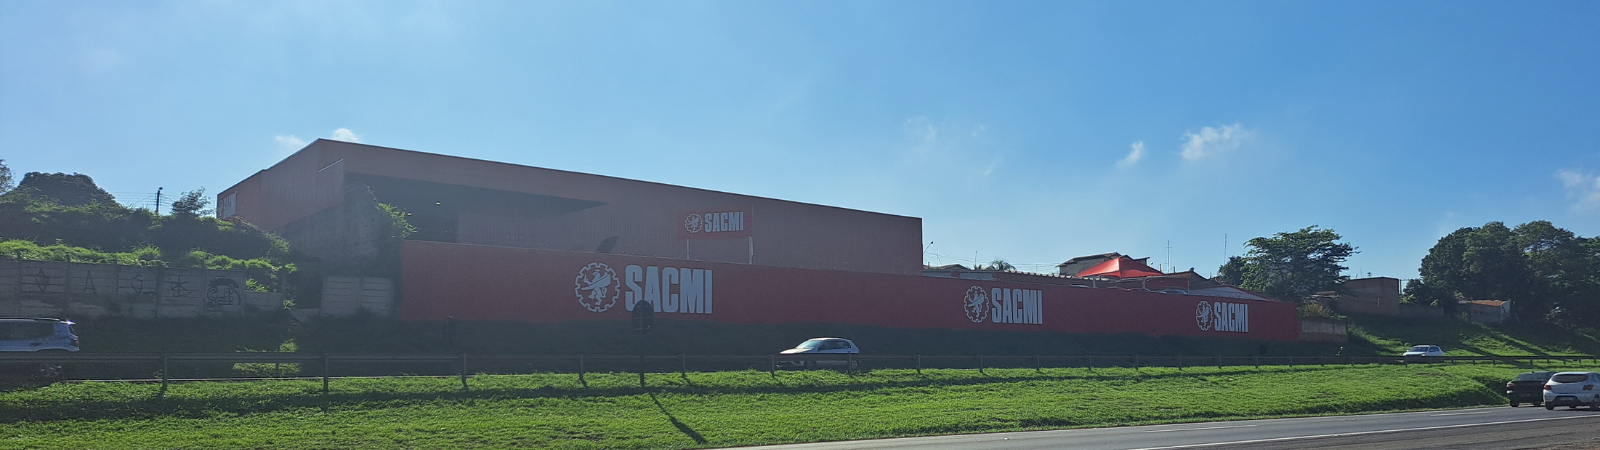 SACMI presents new services to its Brazilian customers